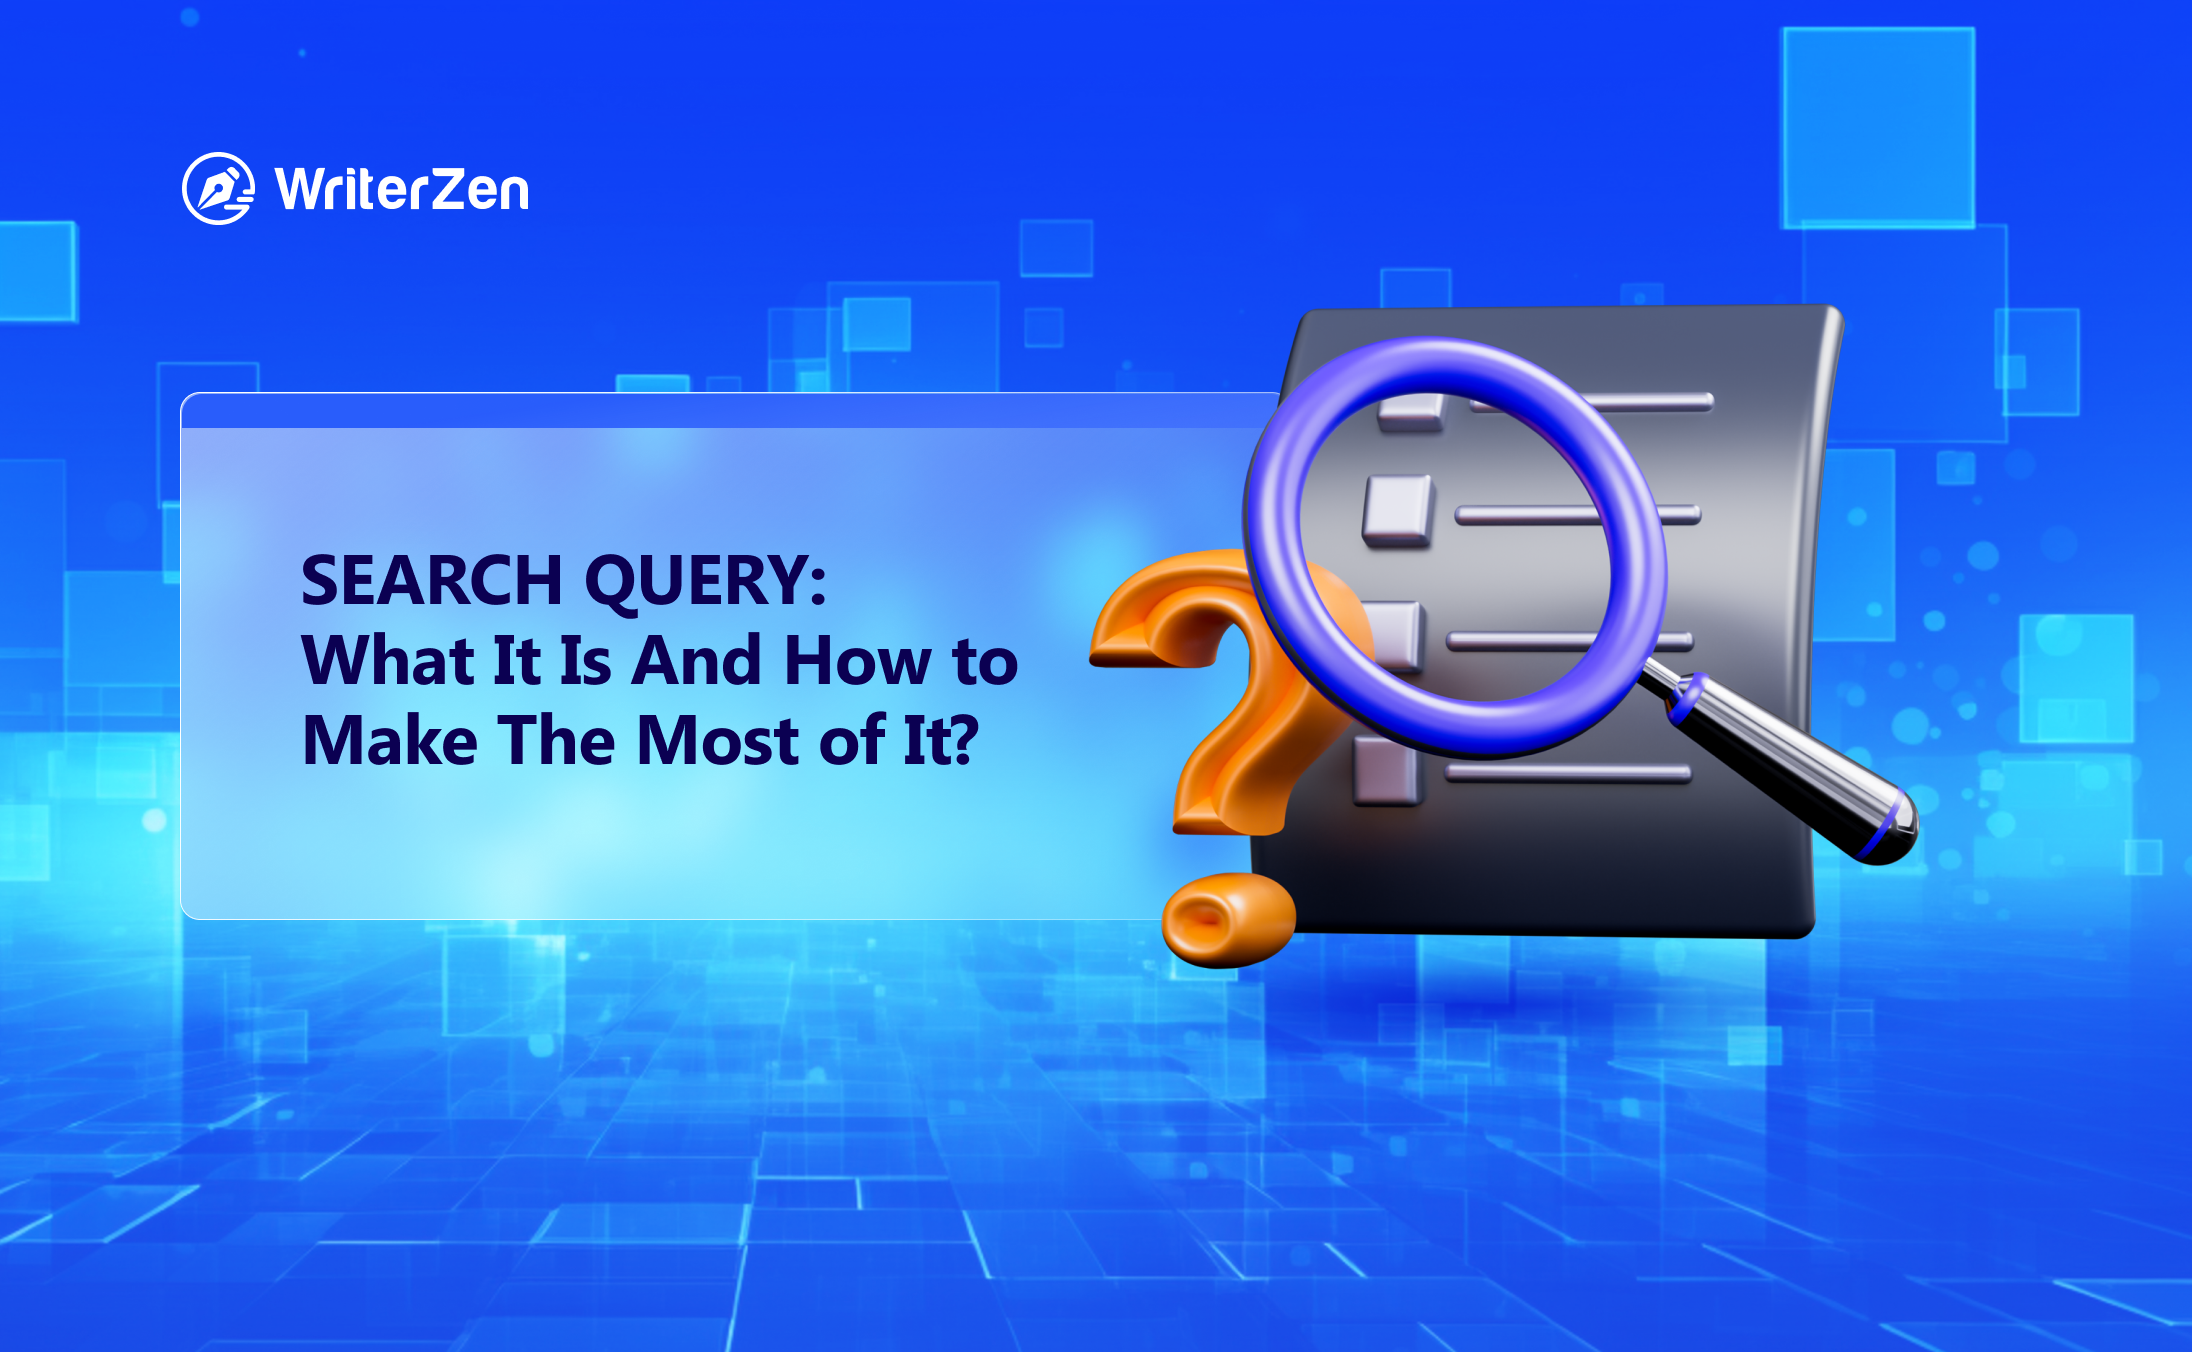 Search Query: What It Is And How to Make The Most of It